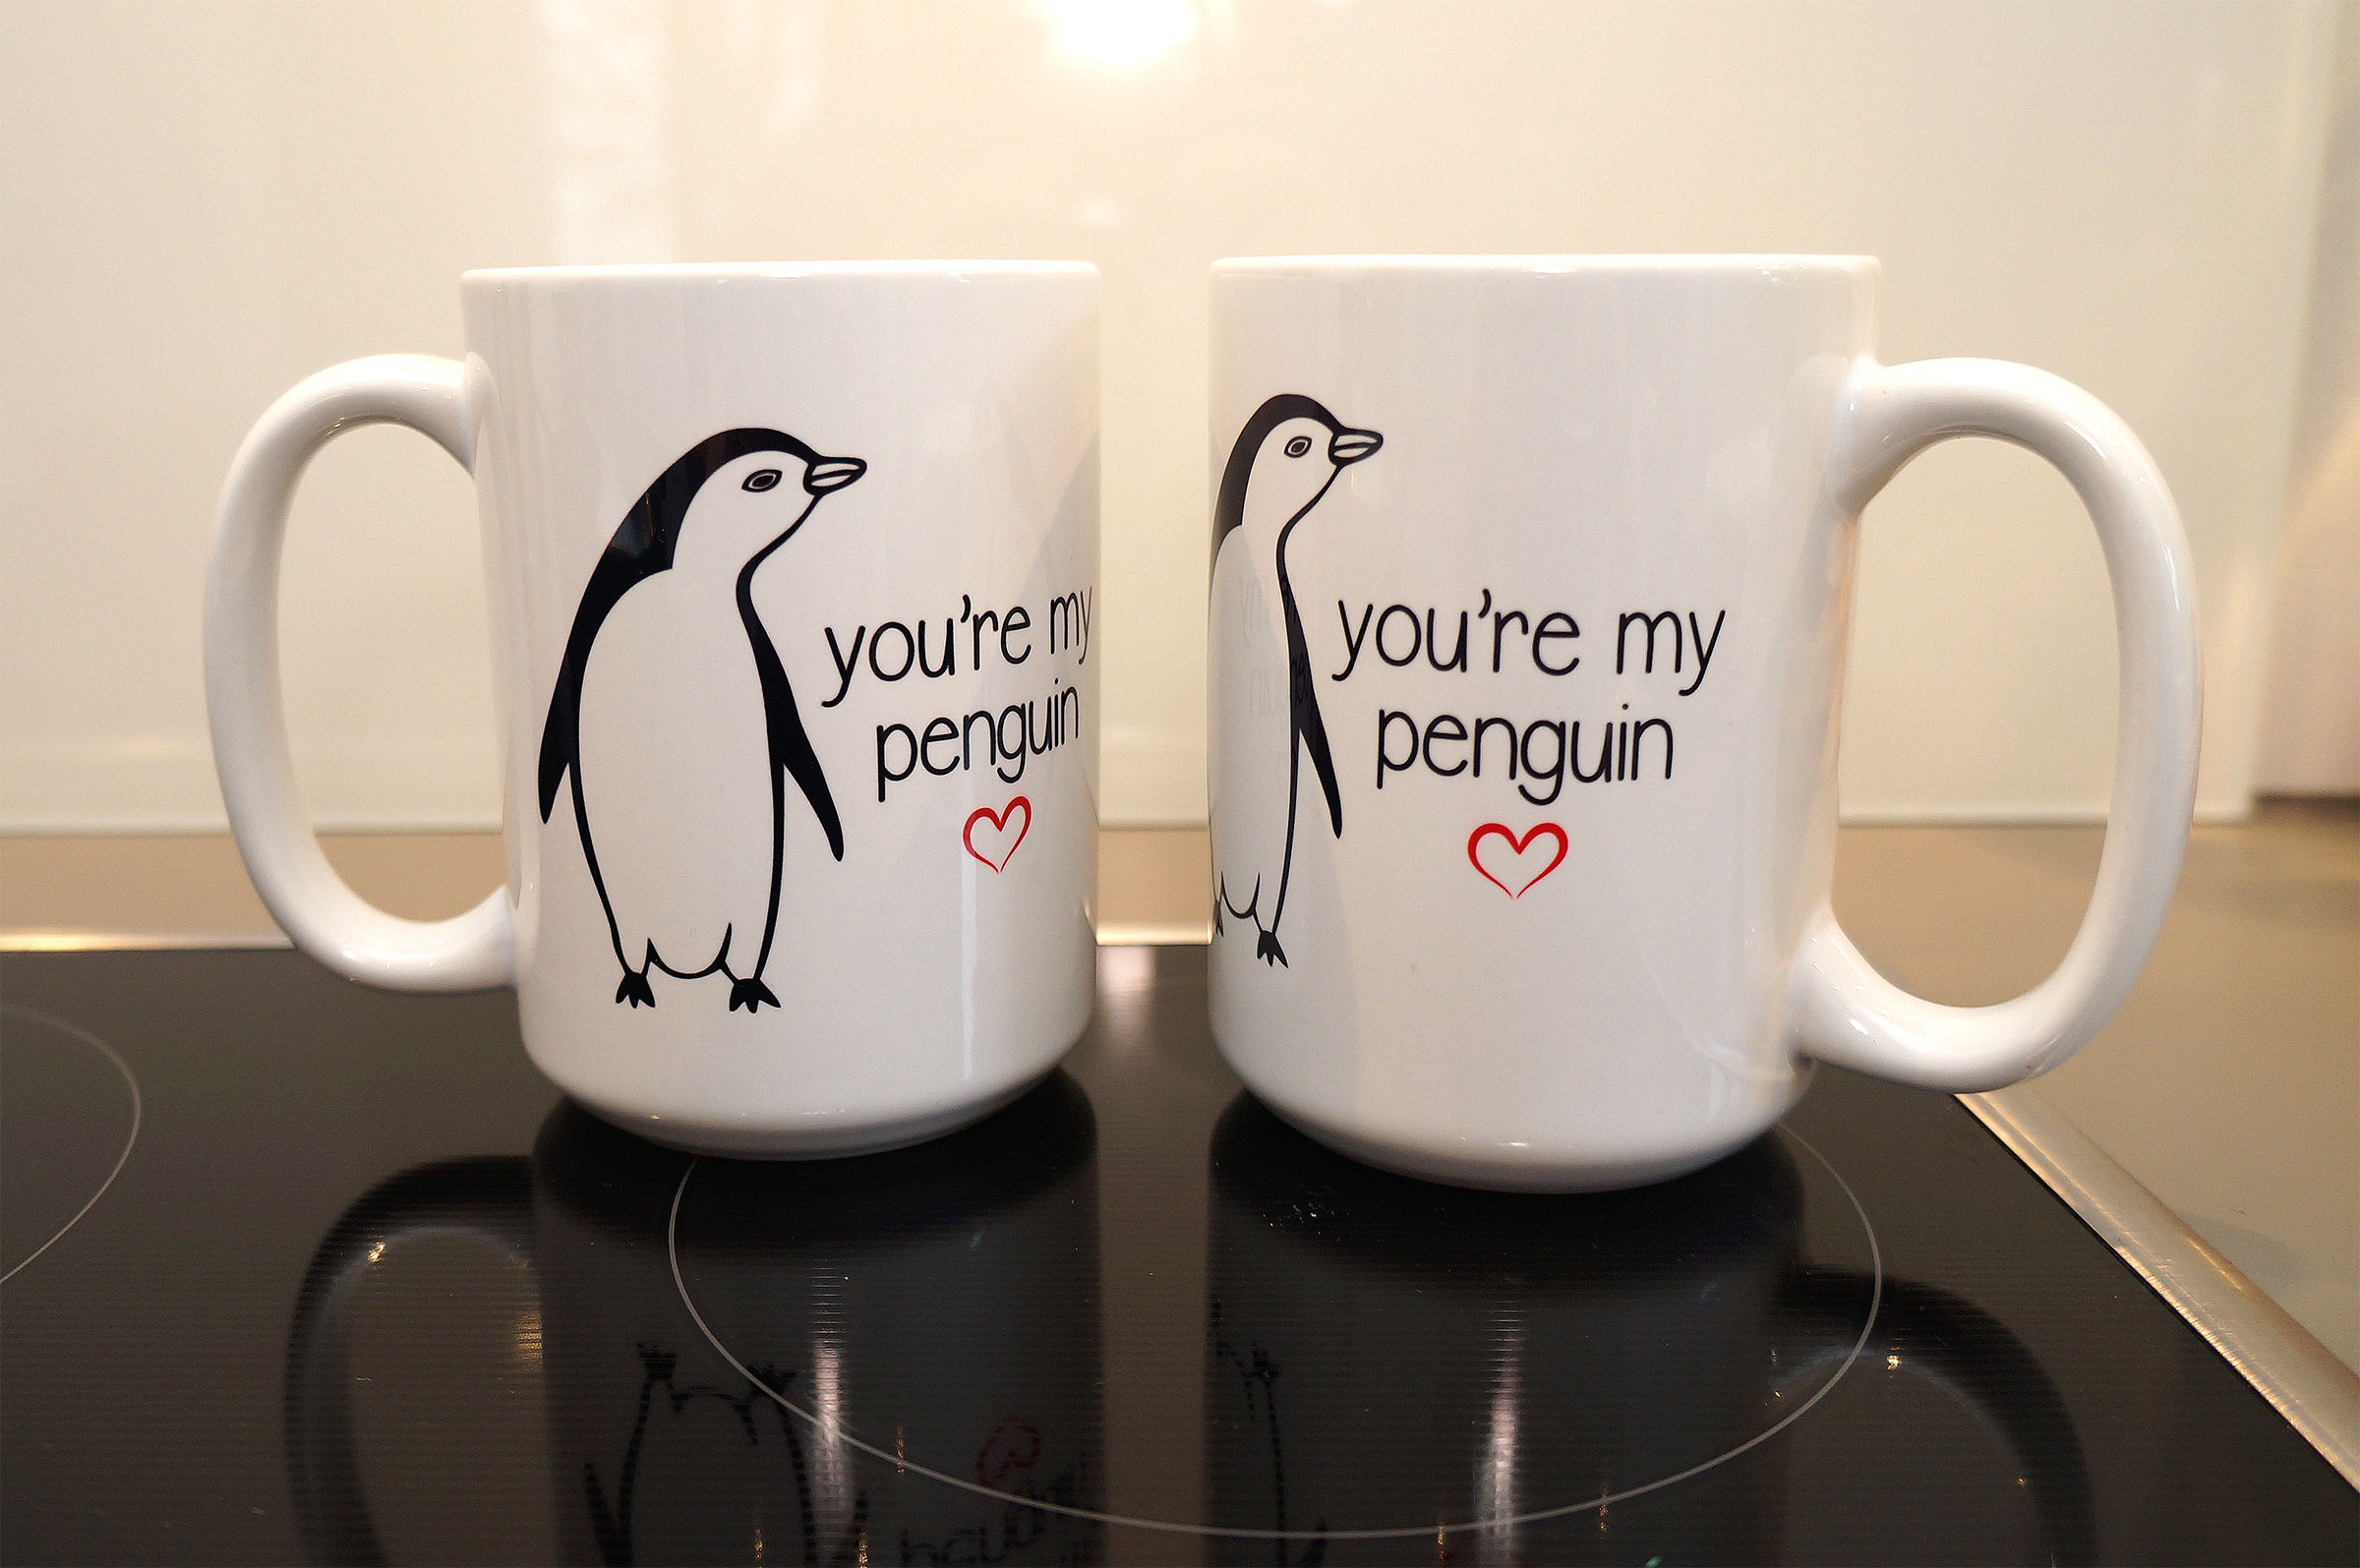 You are my Penguin Tasse